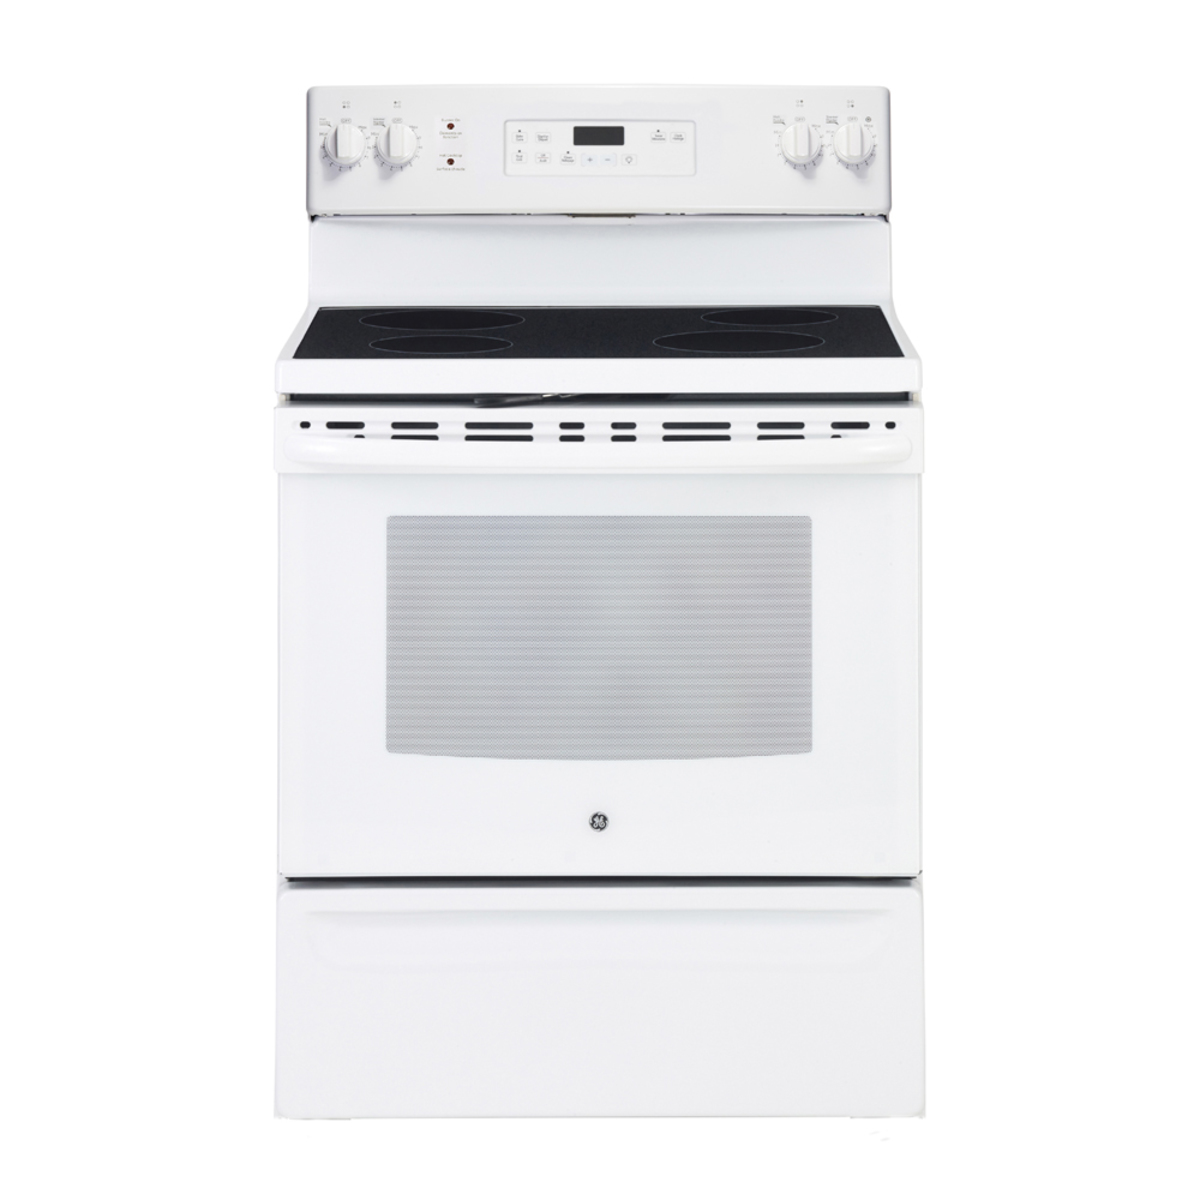 GE 5.0 cu. ft. Removable Self-Cleaning Electric Range – JCB630DKWW